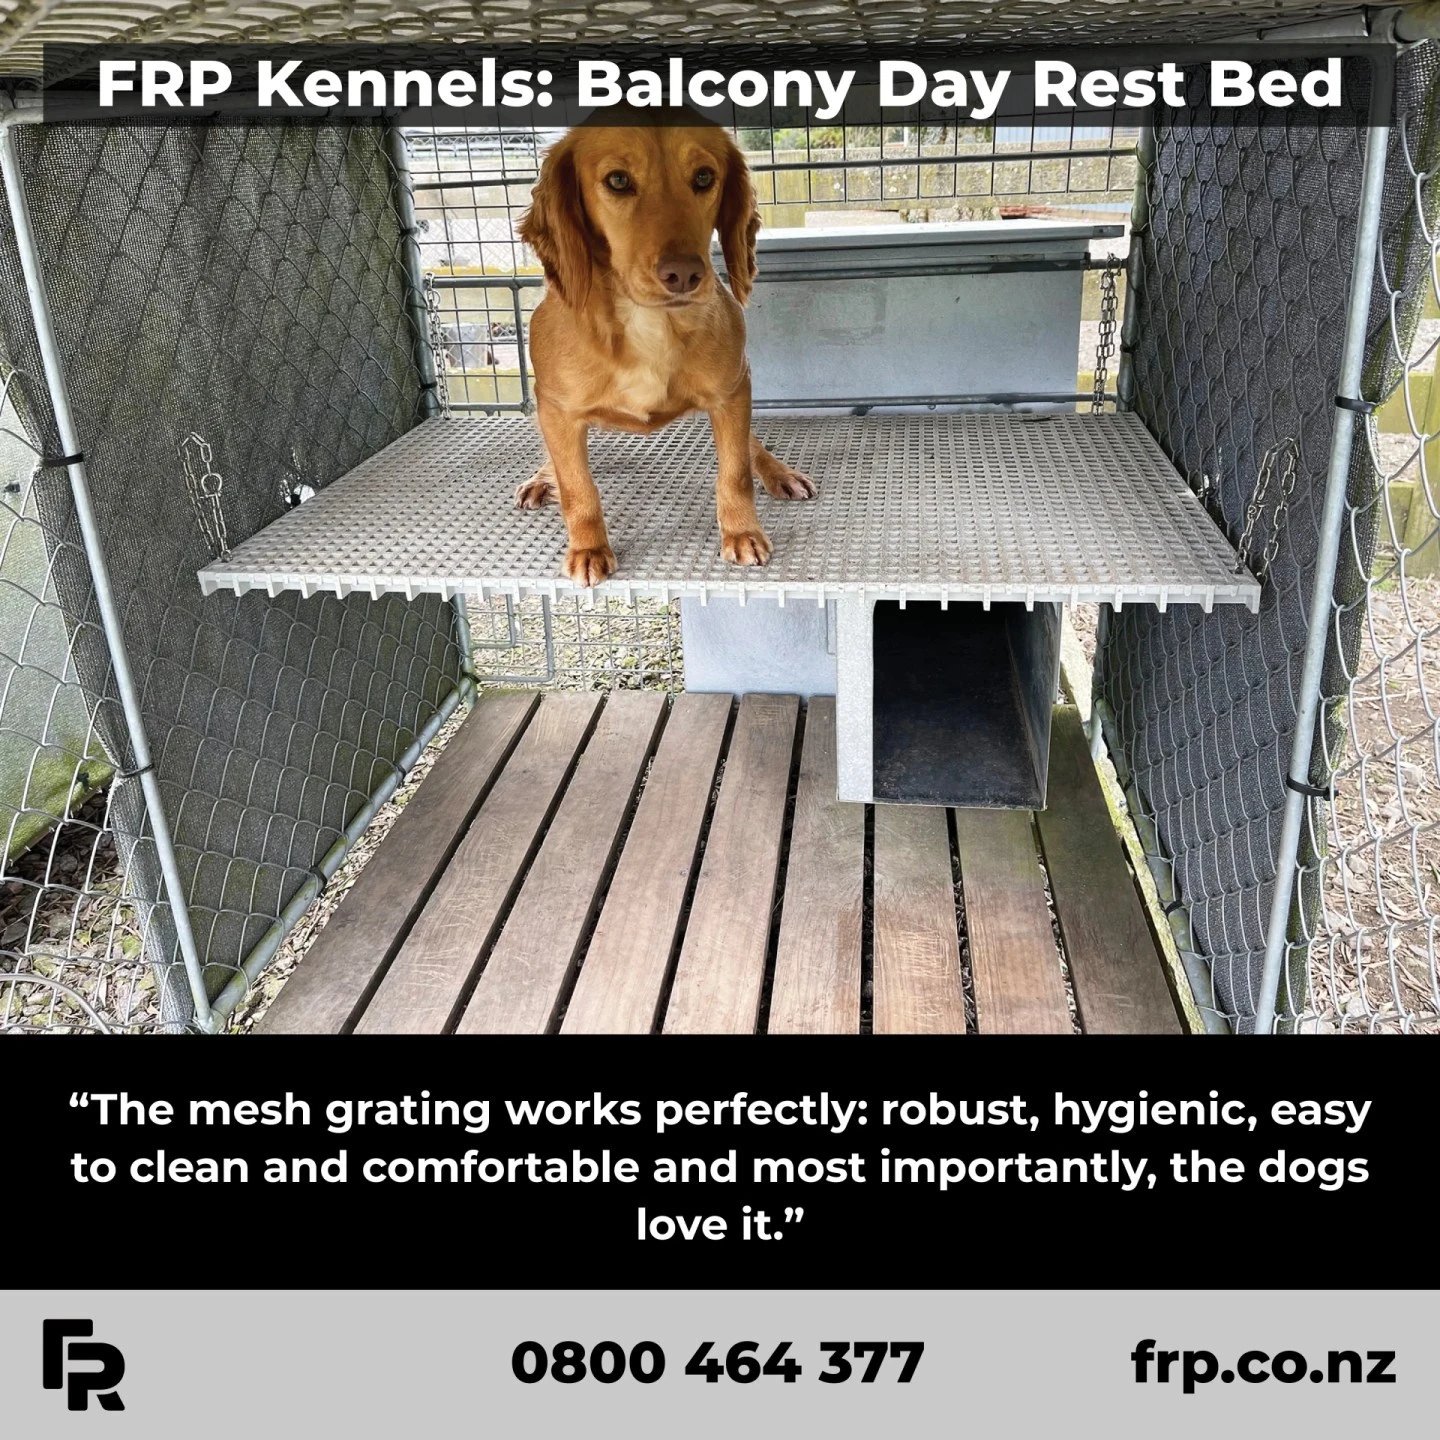 Our FRP Grating is versatile to suit a wide range of applications – including dog kennels!

#frp #frpproducts #frpgrating #dogkennels #kennel #animals #diyprojects #dogowners #pets